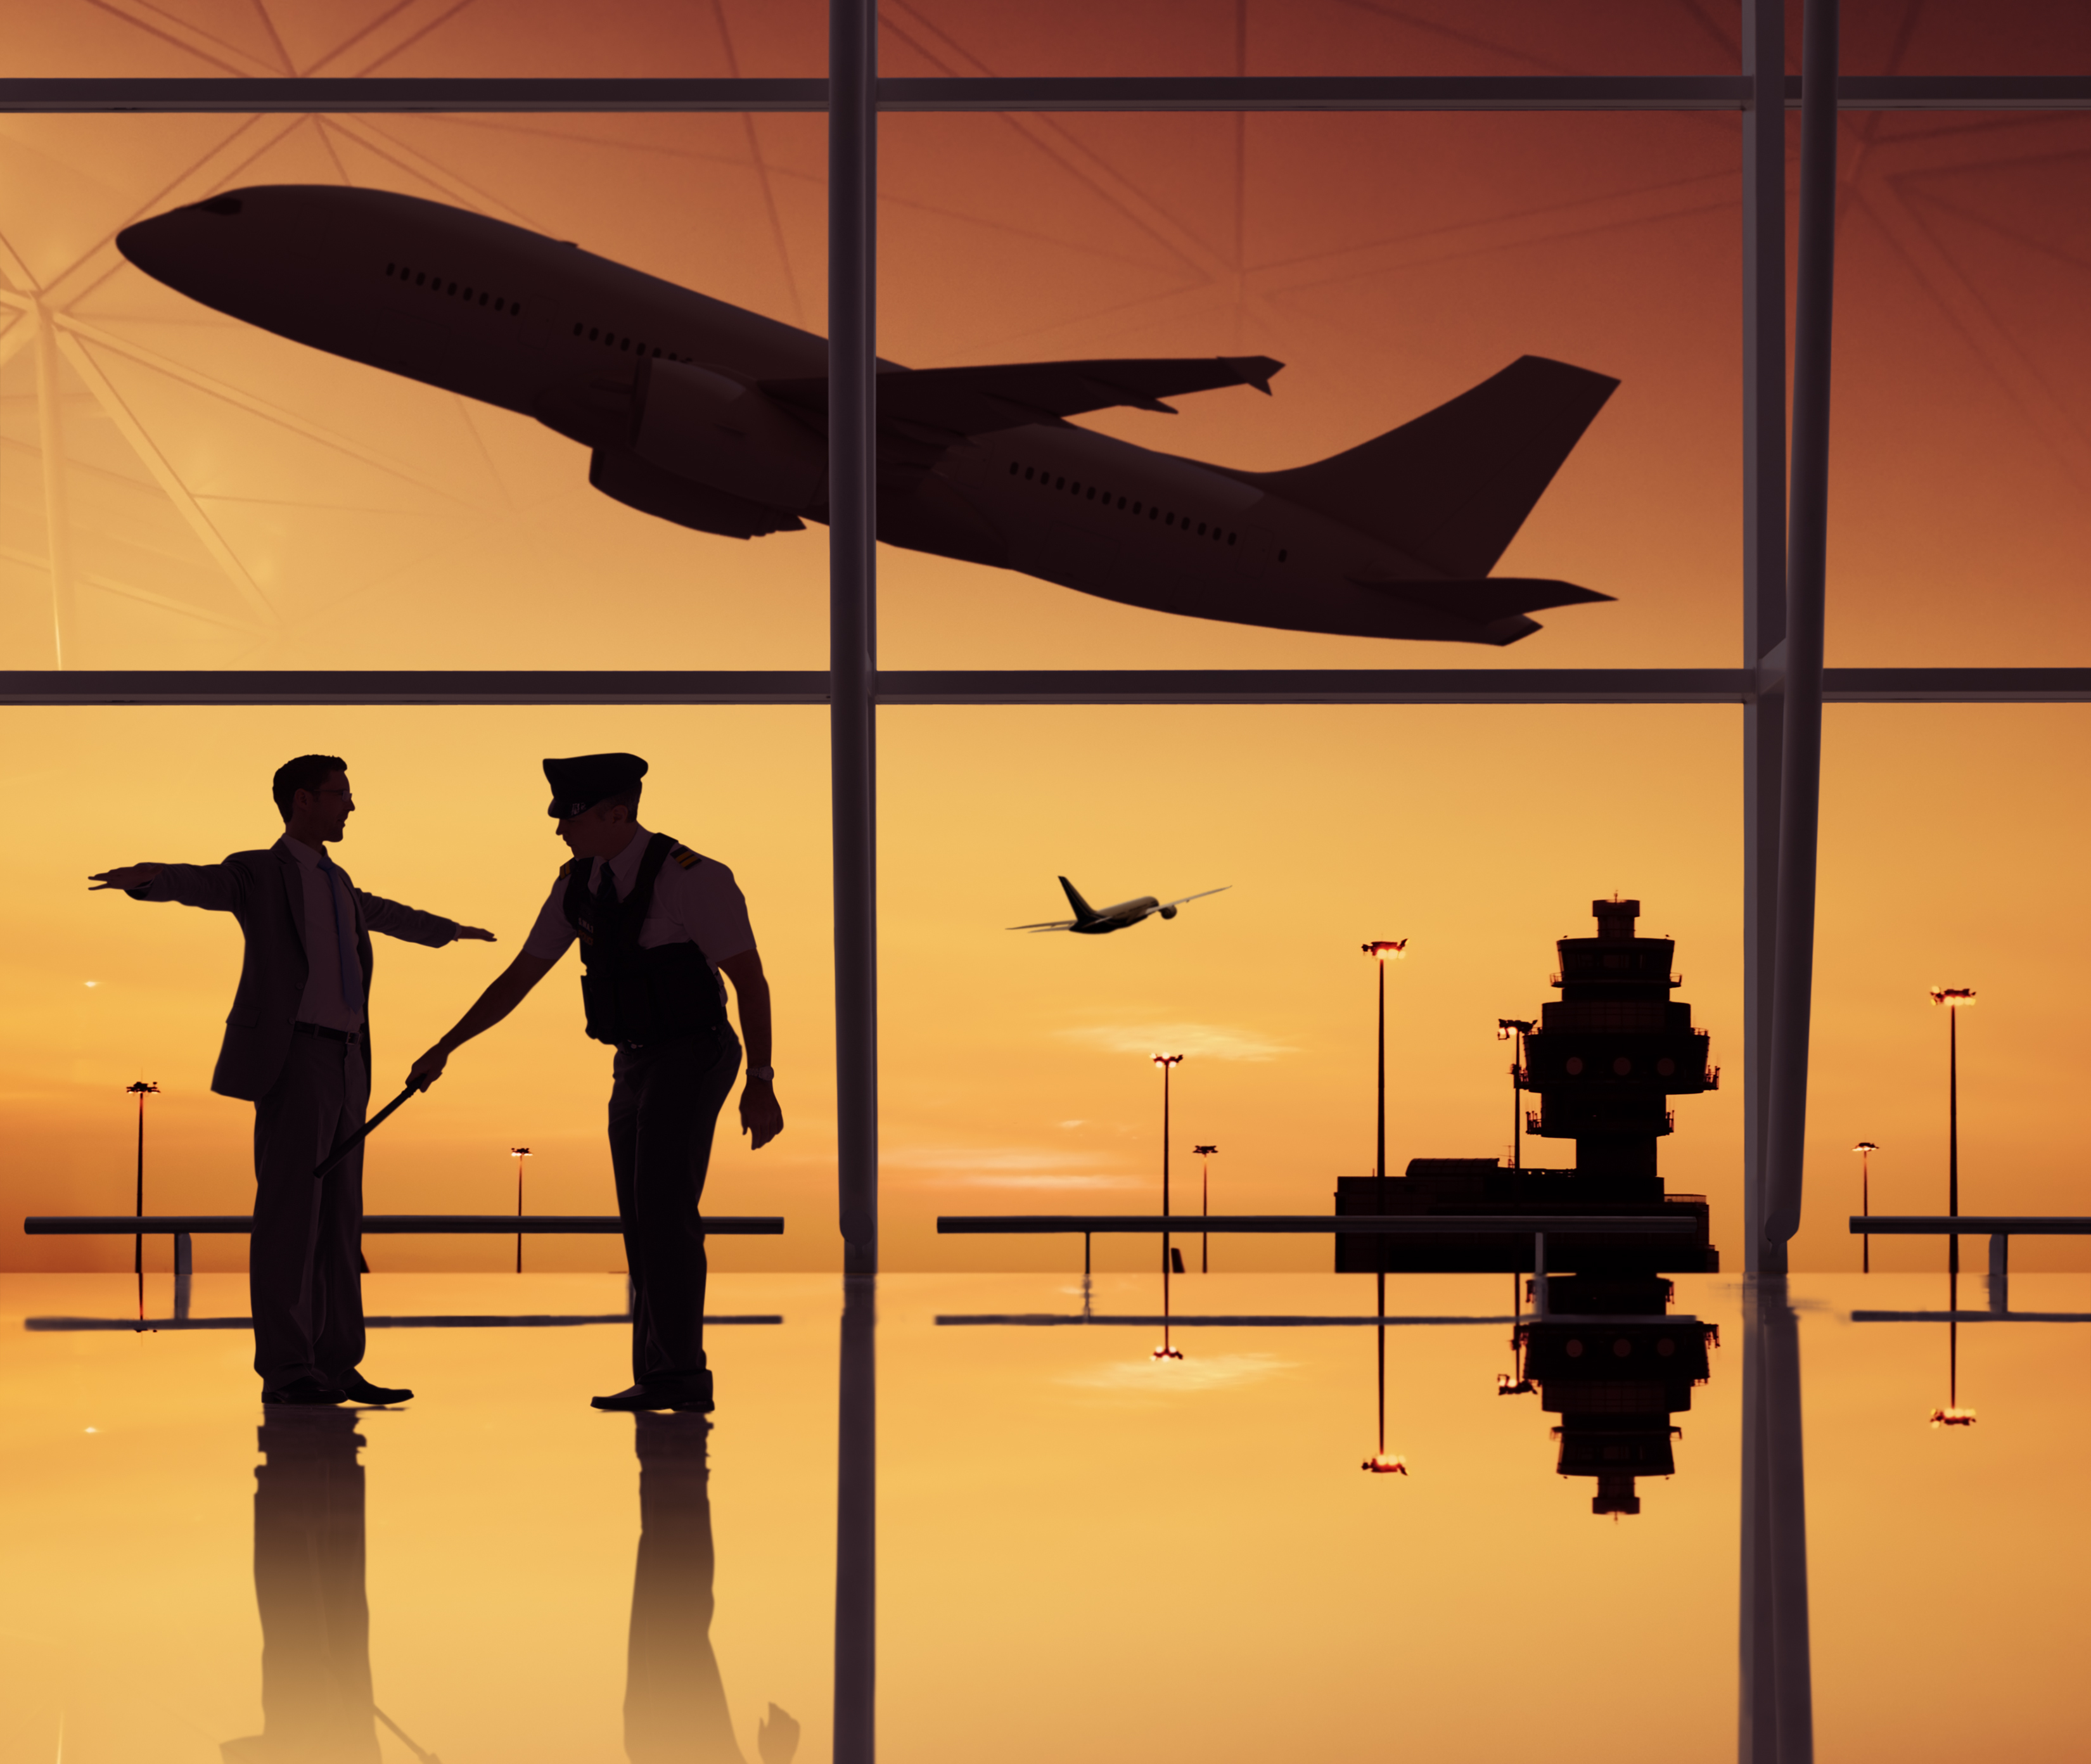 a silhouette of two men in an airport